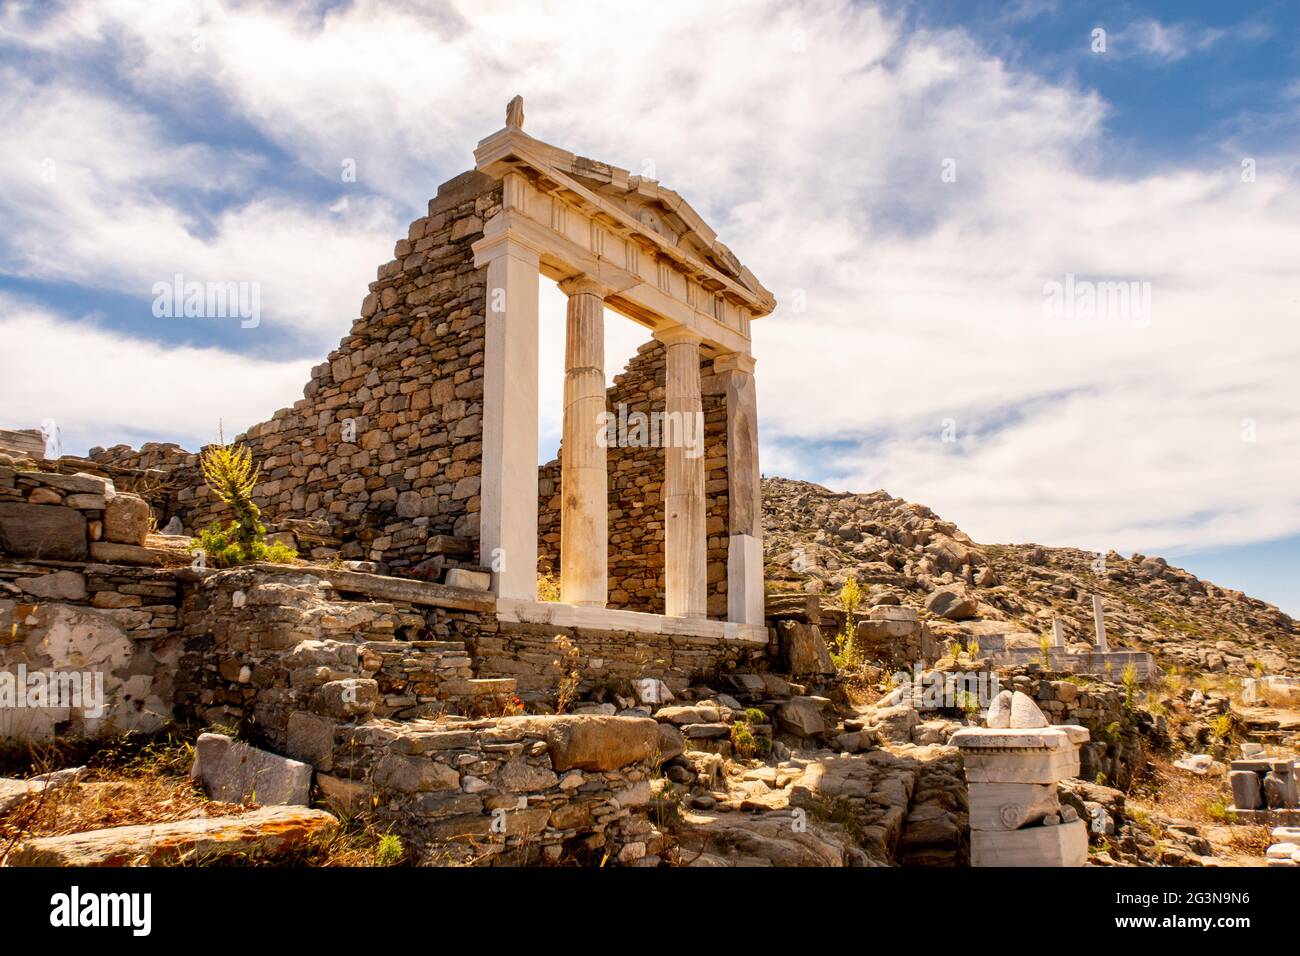 Well preserved Temple of Isis side view on Delos Island located on the hill above the ancient city with blue sky and clouds in the background, Greece. Stock Photo